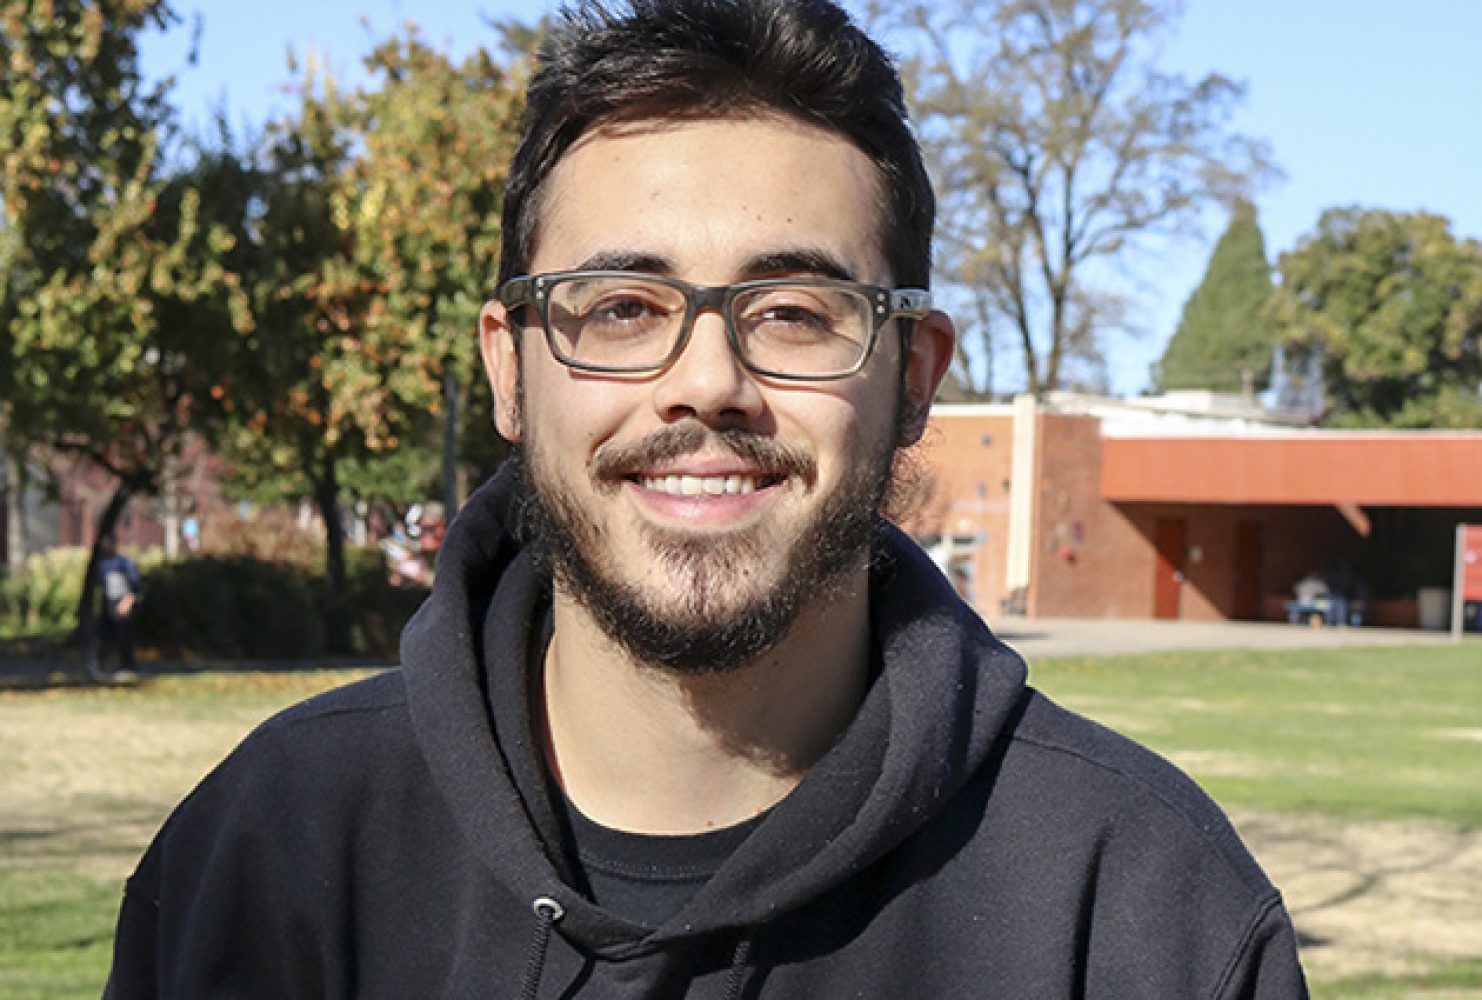 “I haven’t because I didn’t really know about them.” -Brian Tilley | Social science major